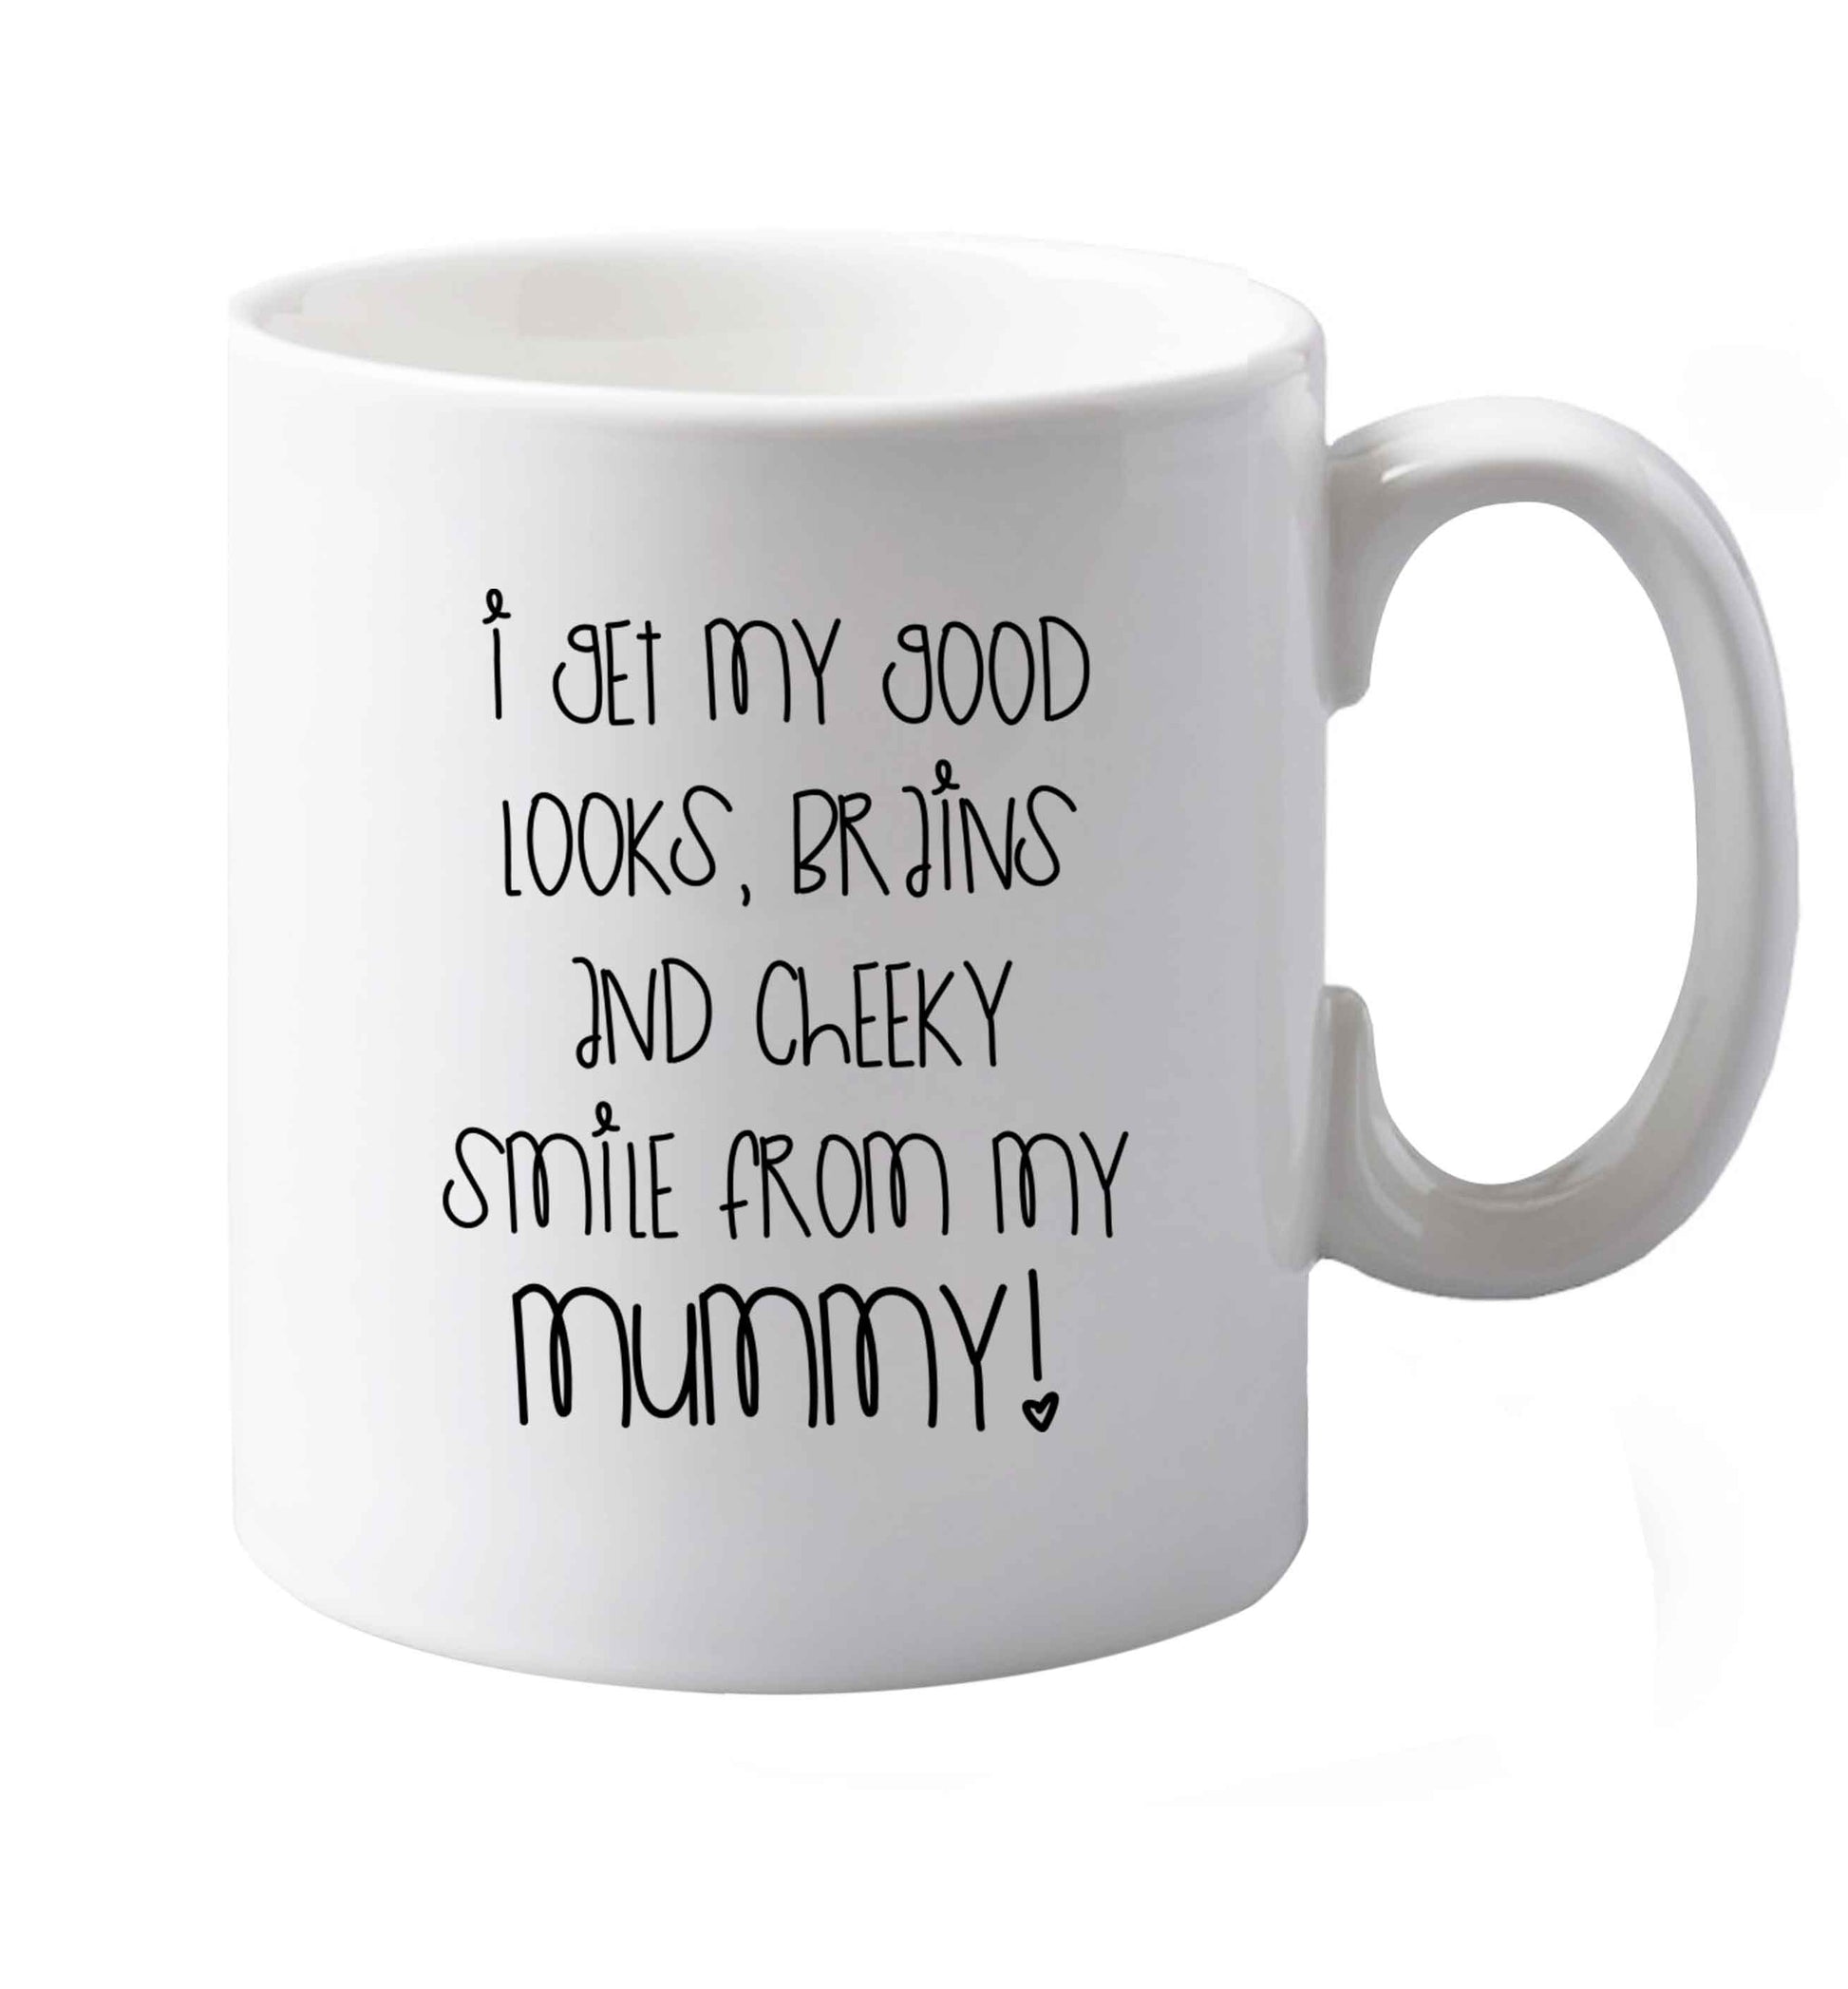 10 oz I get my good looks, brains and cheeky smile from my mummy ceramic mug both sides